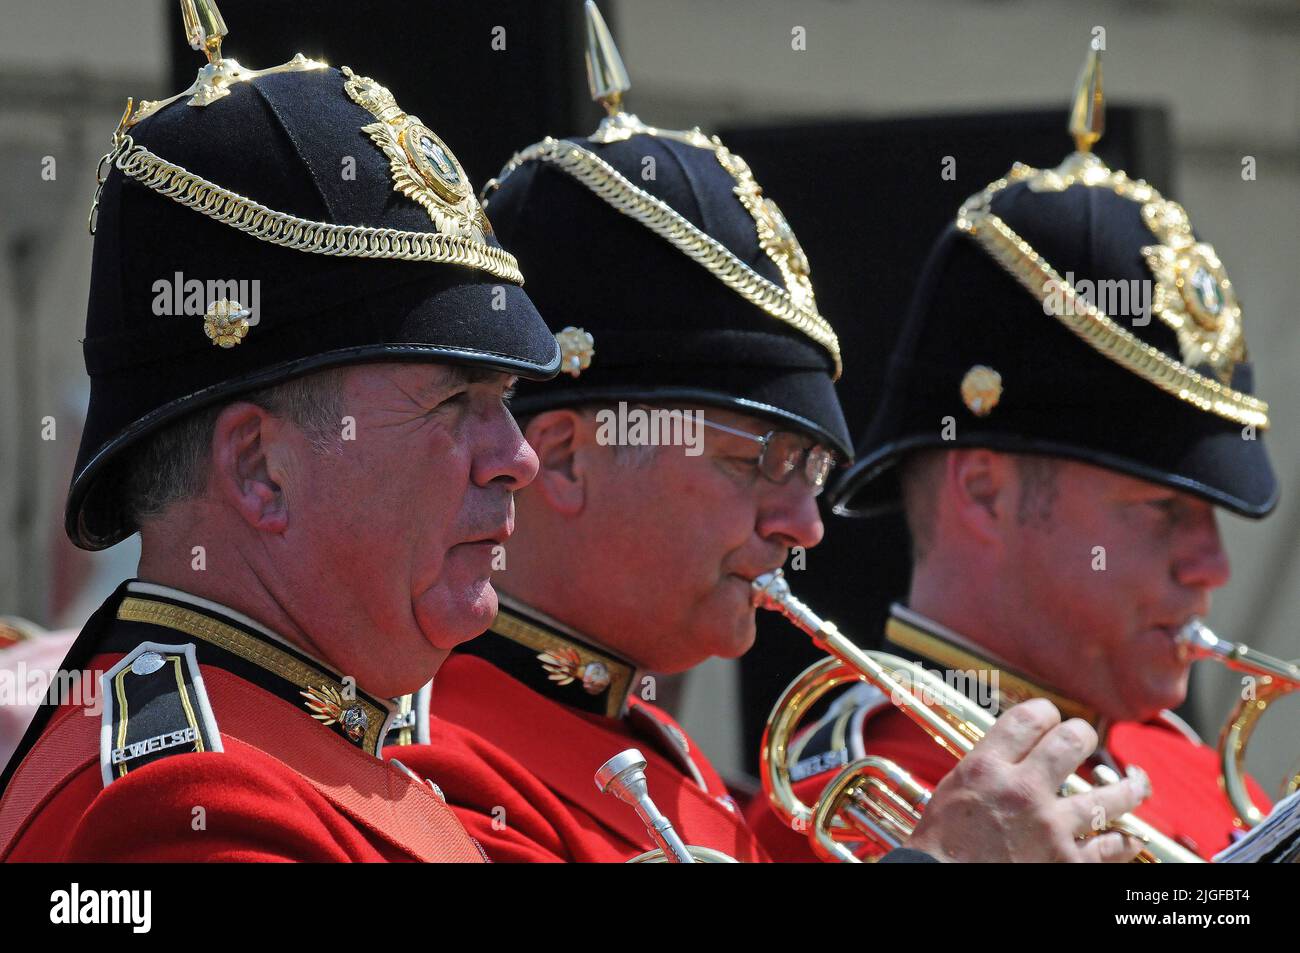 Bute Park, Armed Forces Day, 2015. Stock Photo